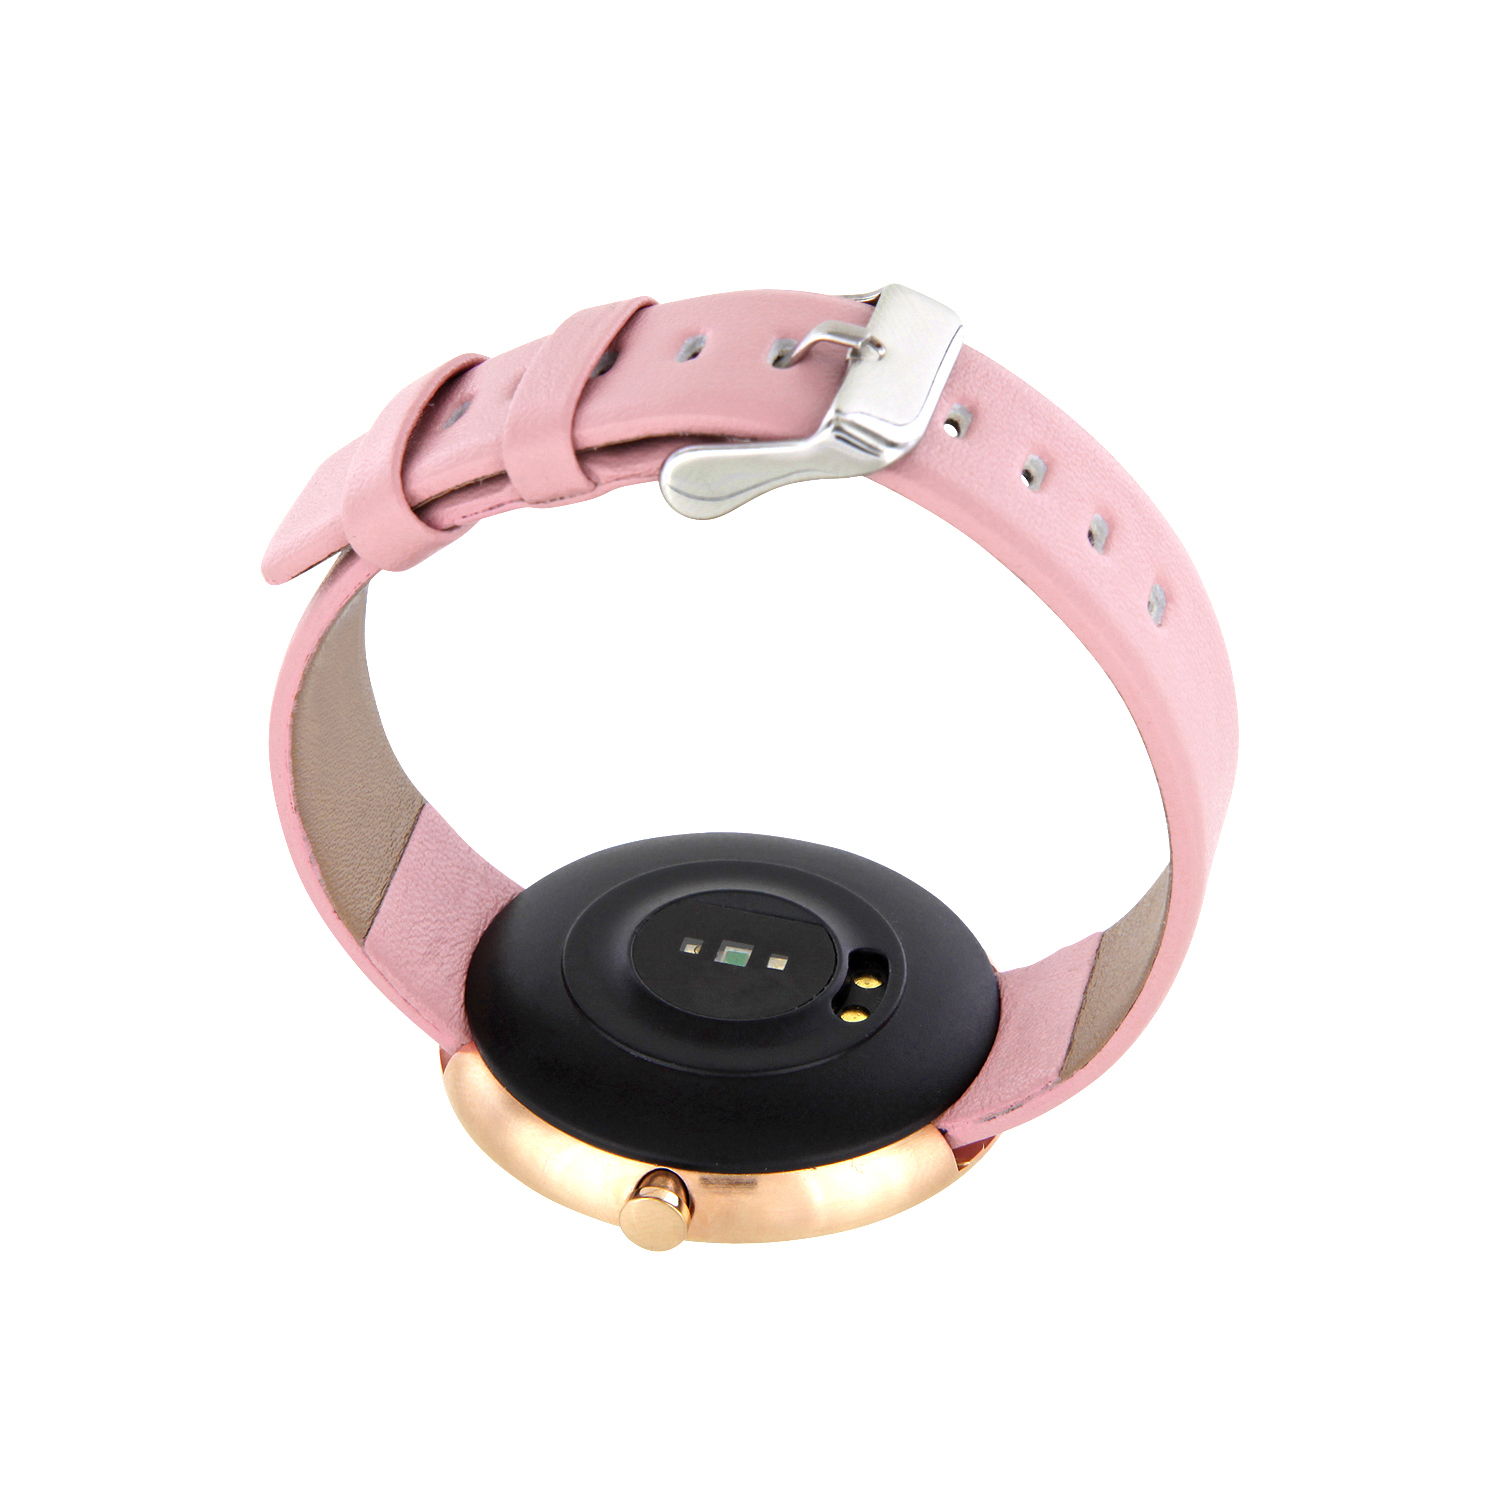 Gn5001 en watch up set smart to bluetooth how note